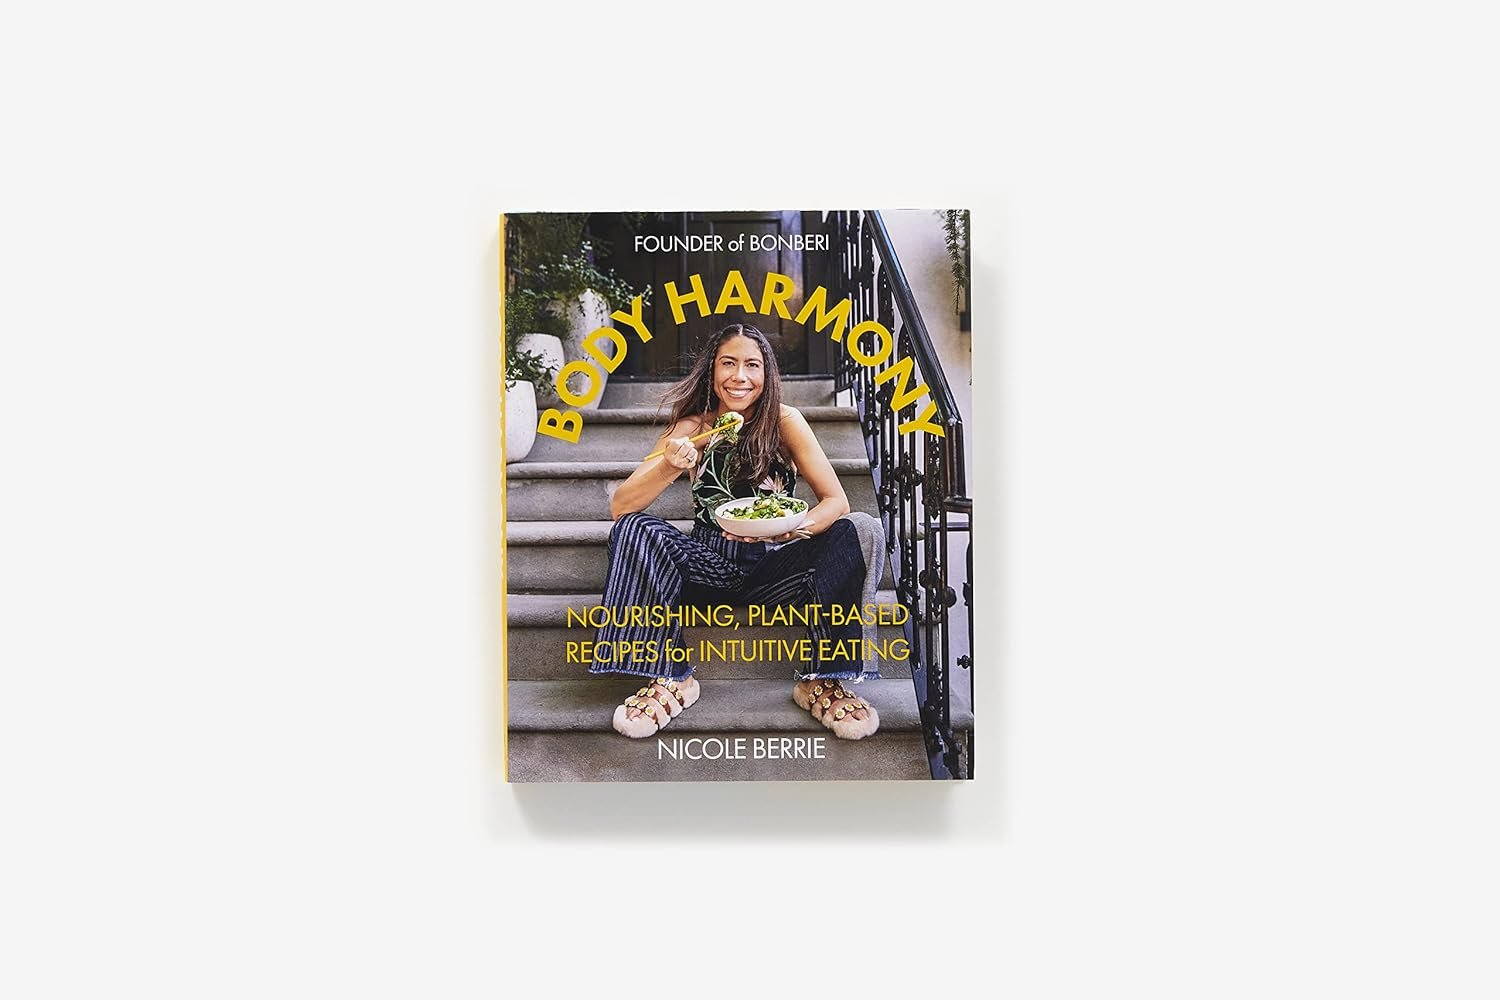 a book with a woman eating food on the cover